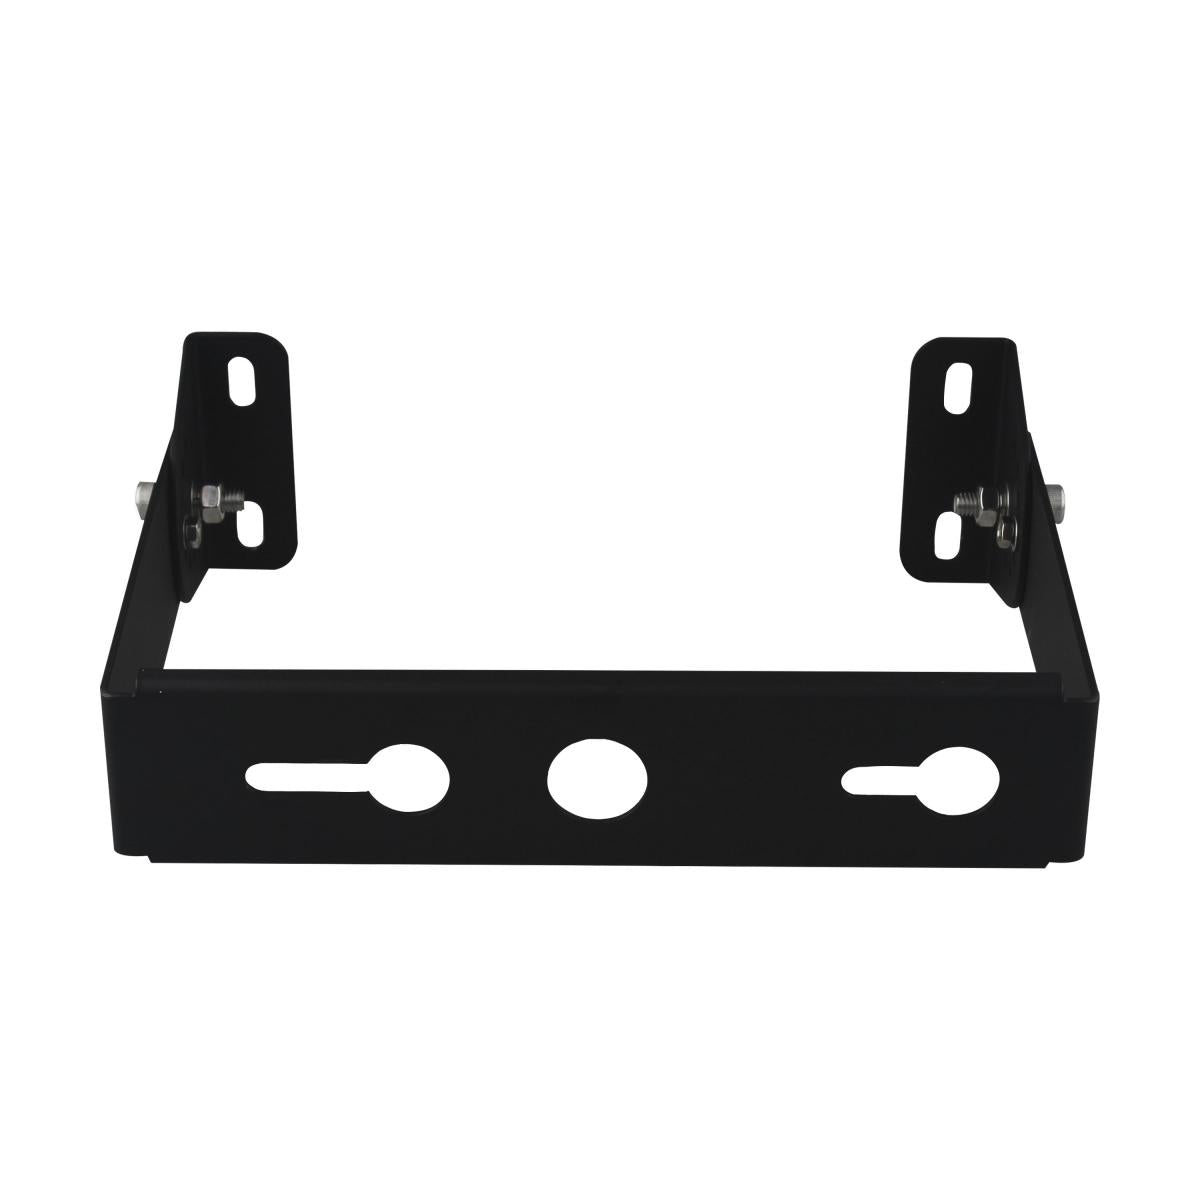 Satco 65-766 Yoke Mount Bracket Black Finish For Use With Gen 2 200W/240W & CCT & Wattage Selectable UFO High Bay Fixtures